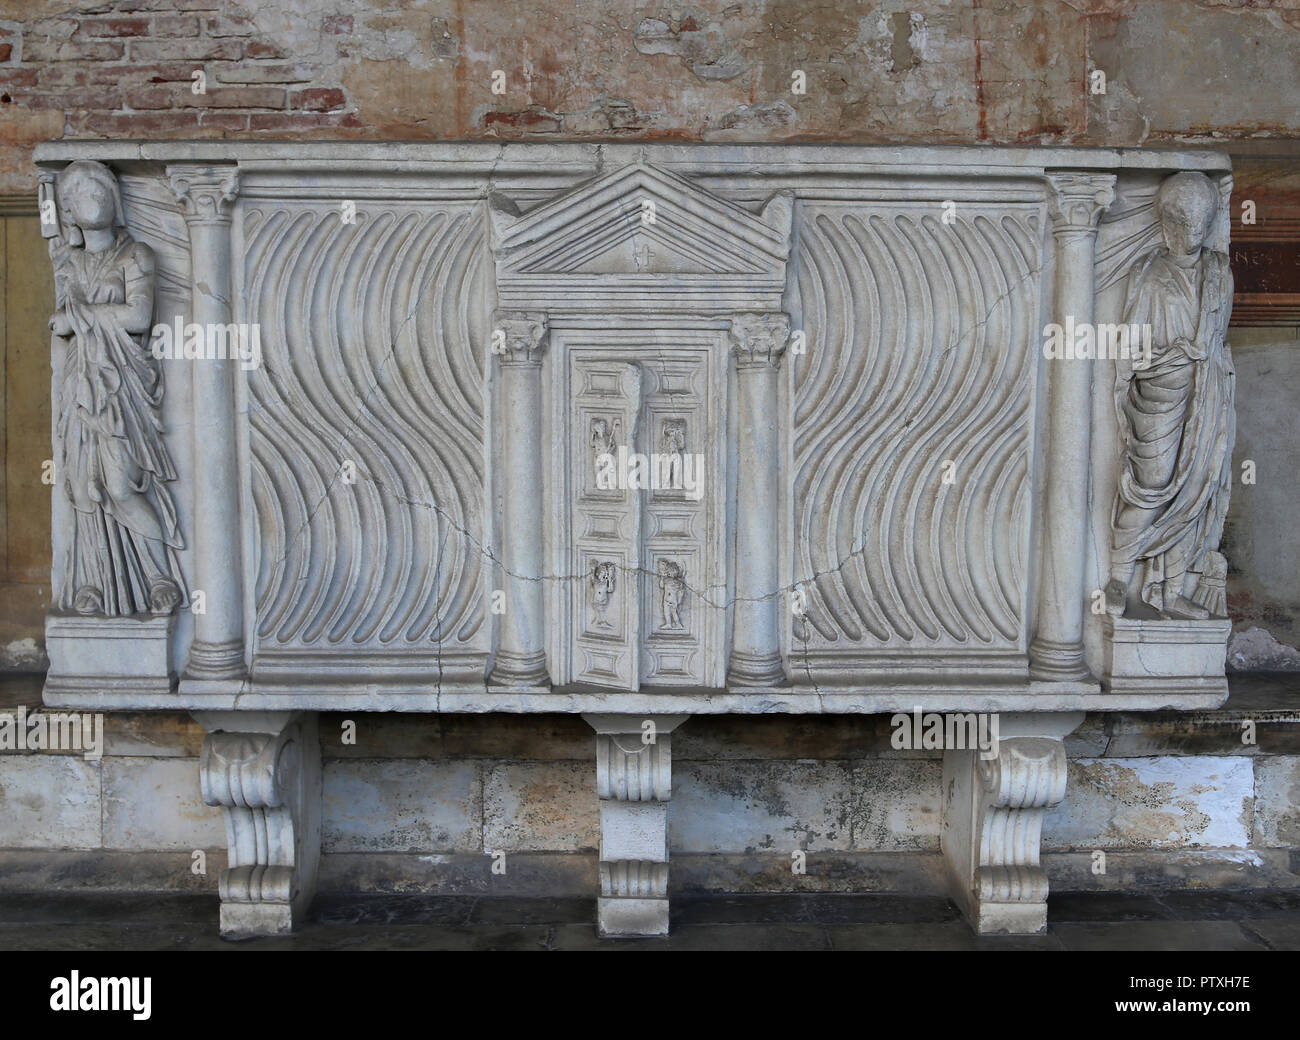 Italy. Pisa. CampoSanto. Roman sarcophagus. Door to the afterlife, strigilated ornament and portraits of the deceased. 3rd CE Stock Photo